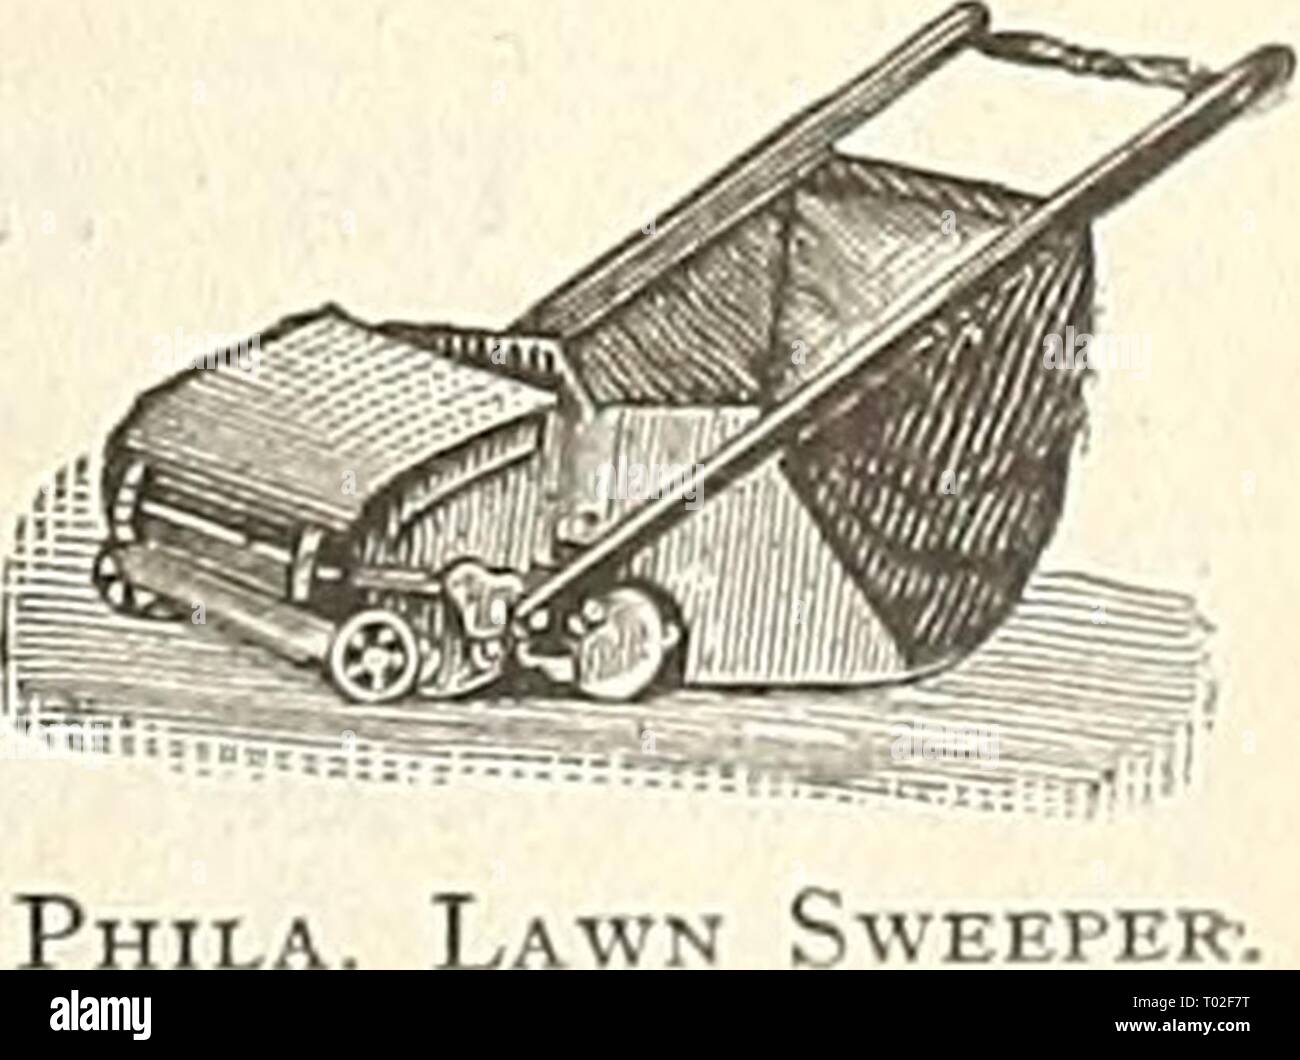 Dreer's garden calendar . dreersgardencale1890henr Year: 1890  .12 .14 ,16 .18 CONTINEXTAL HAND MoWER. Philadelphia Hand Lawn Mower. 32 35 37 38 46 48 50 57 8.00 9.00 Klii'l- 1 l.oi&gt; 12.00 13.110 14..50 16.50 An improvement on the old style closed wiper. High wheel 15 â * ' ' 17 ' 19 ' ' 21 New open wiper pattern, as they run quieter, smoother and do better work. 14 inch, weighs 33 lbs., $9.00; 16 inch, weighs 34 lbs., $10.00 ; 18 inch, weighs 36 lbs., $11.00. Pennsylvania Hwrse Lawn MoAver. This machine is made wholly of iron and steel, with the gearing neatly bo.Â°d. It has an open cylin Stock Photo